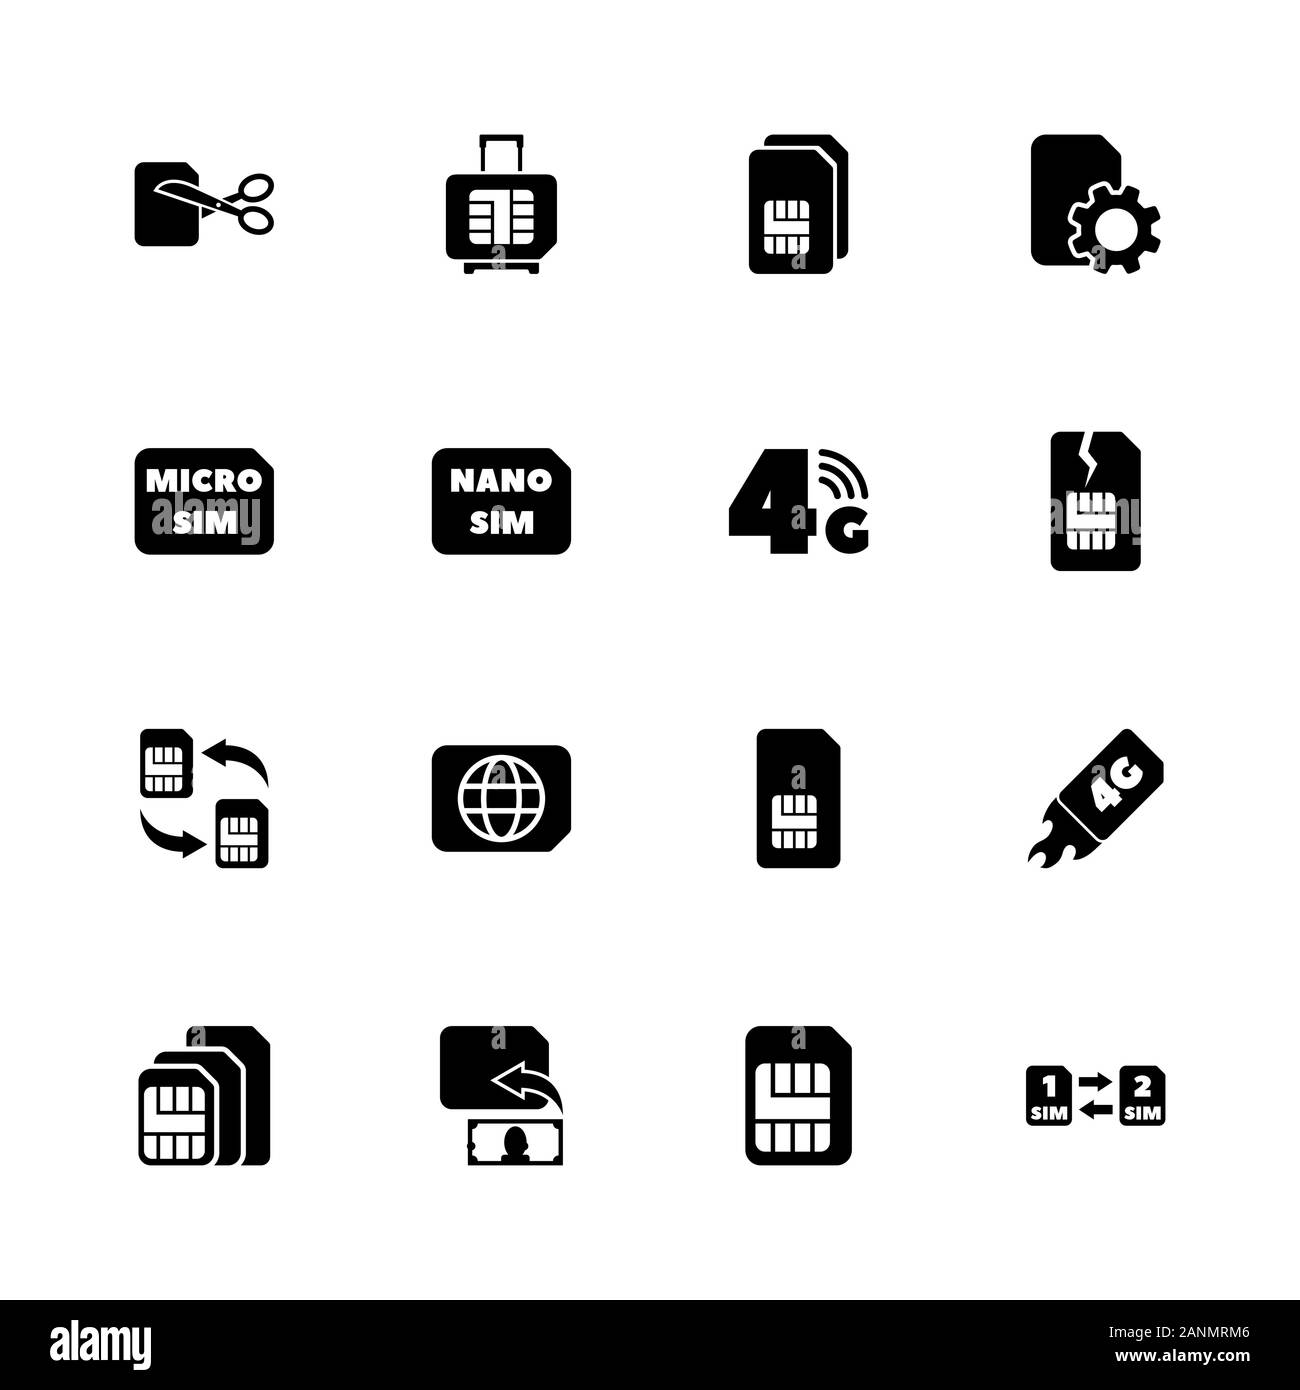 Sim Cards icons - Expand to any size - Change to any colour. Flat Vector Icons - Black Illustration on White Background. Stock Vector